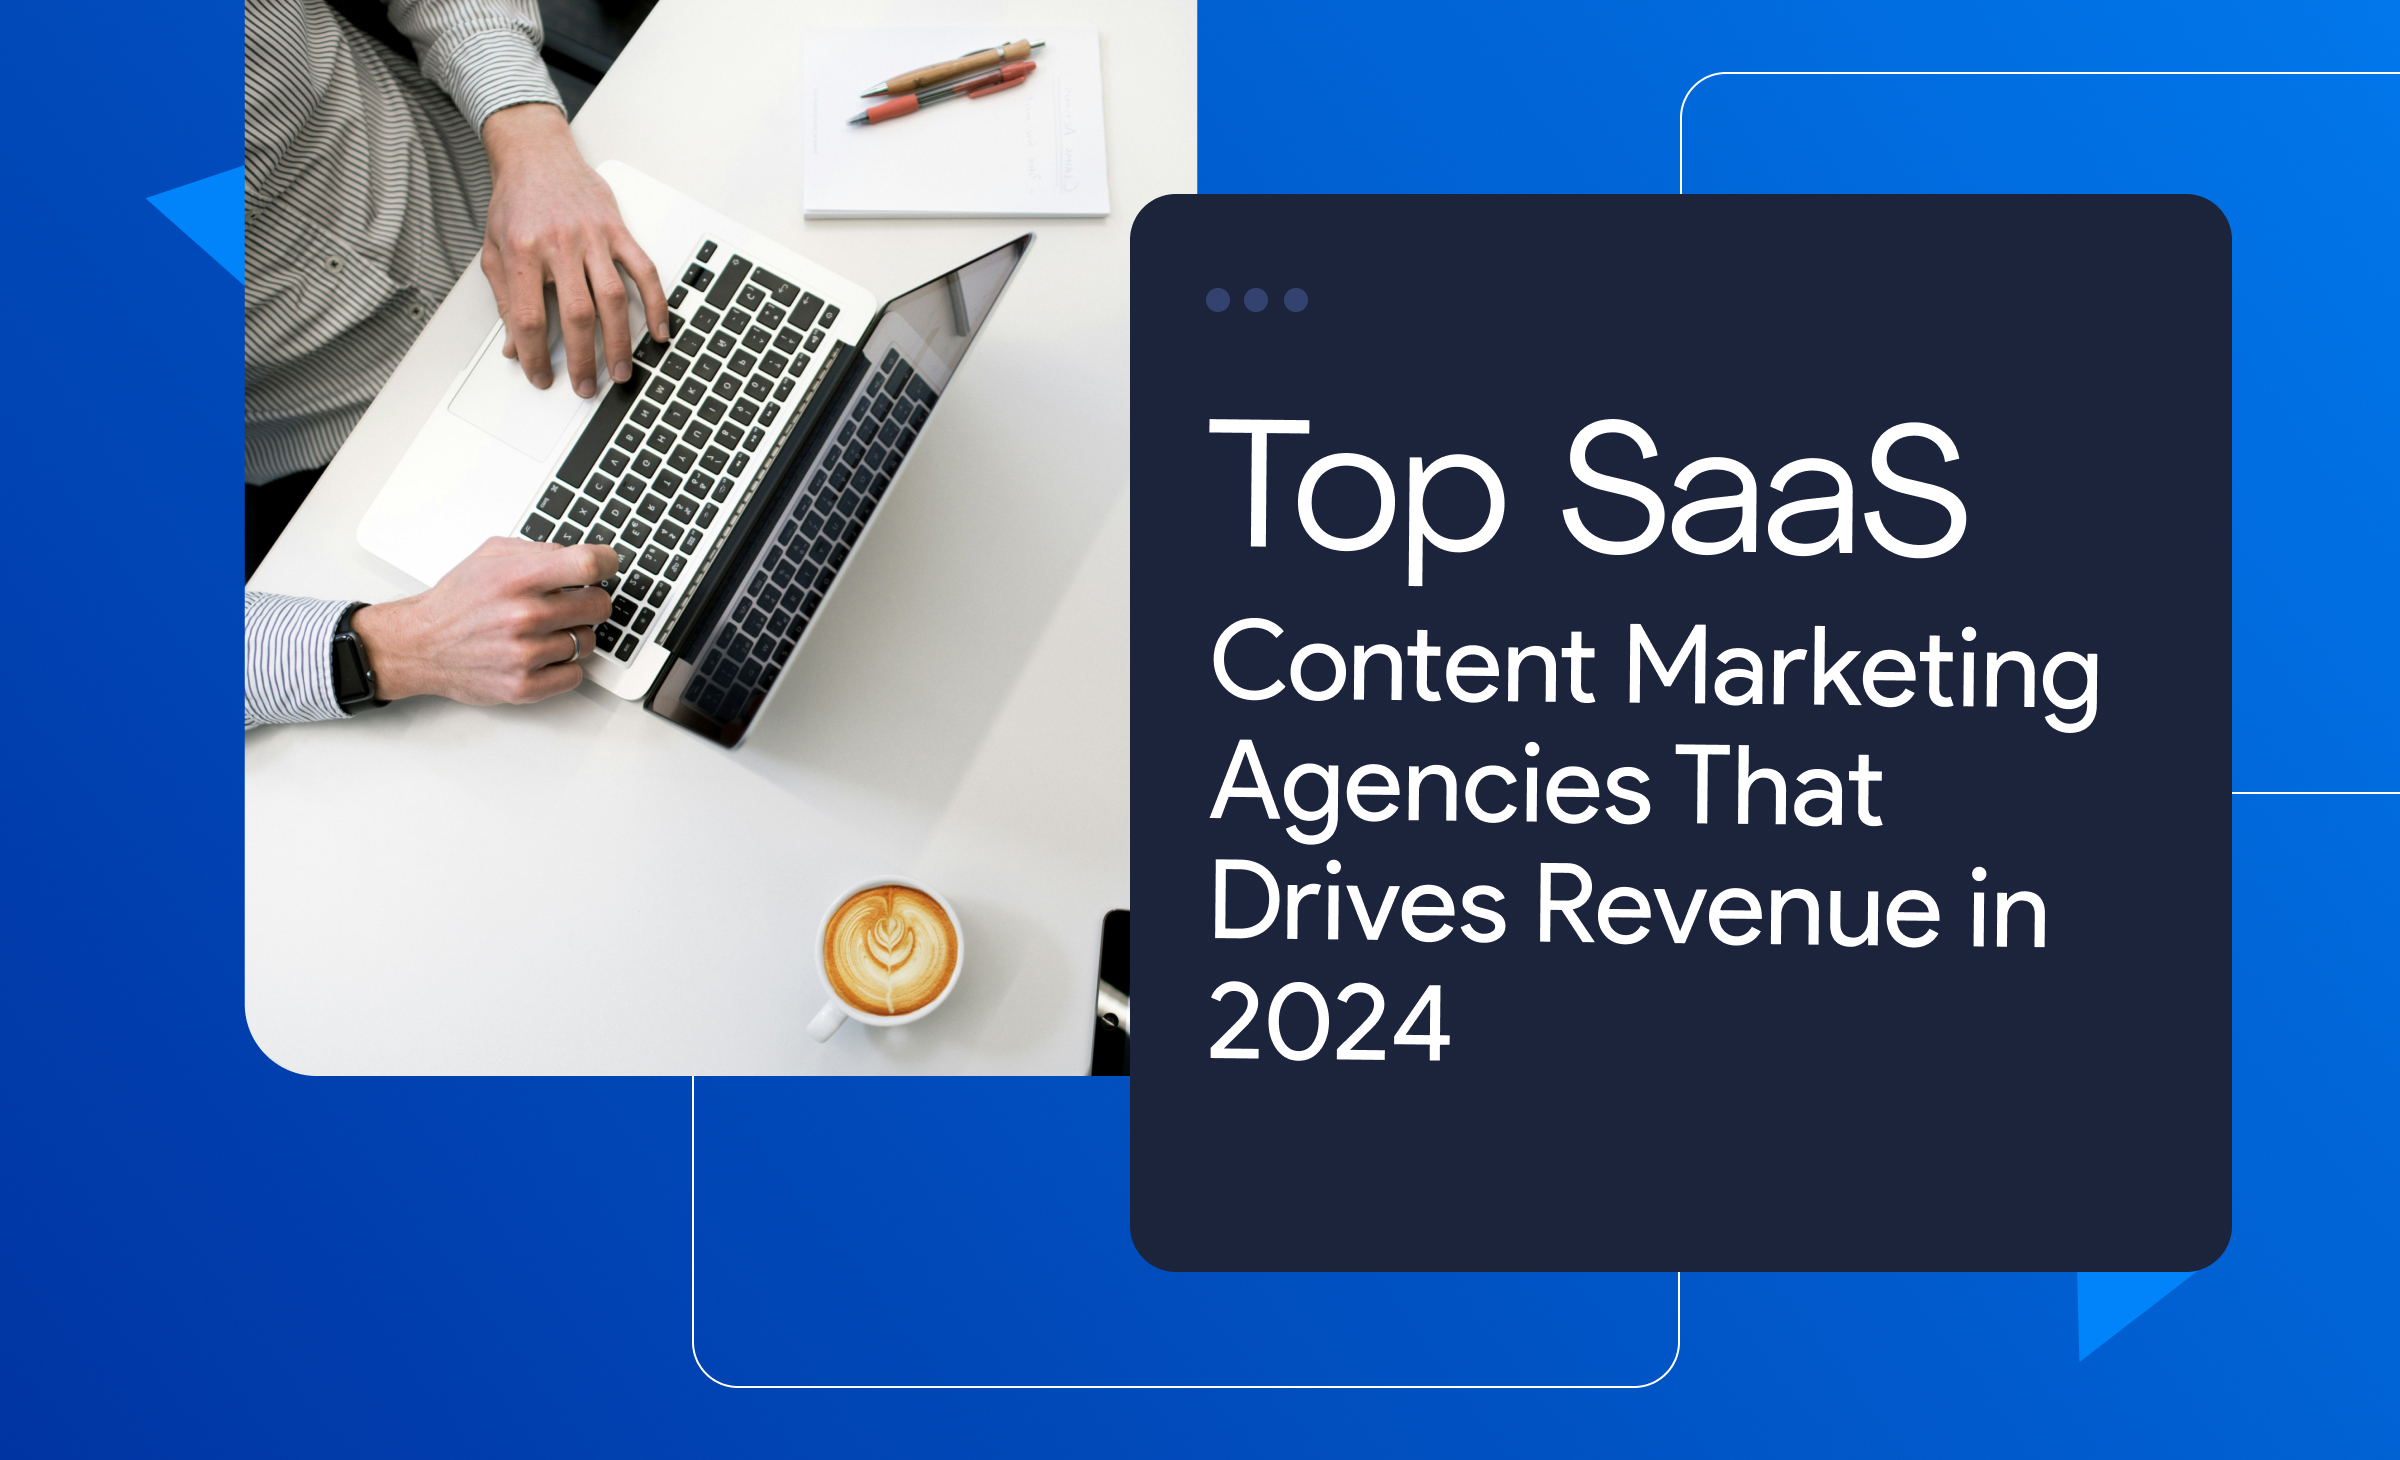 Top SaaS Content Marketing Agencies That Drive Revenue in 2024.